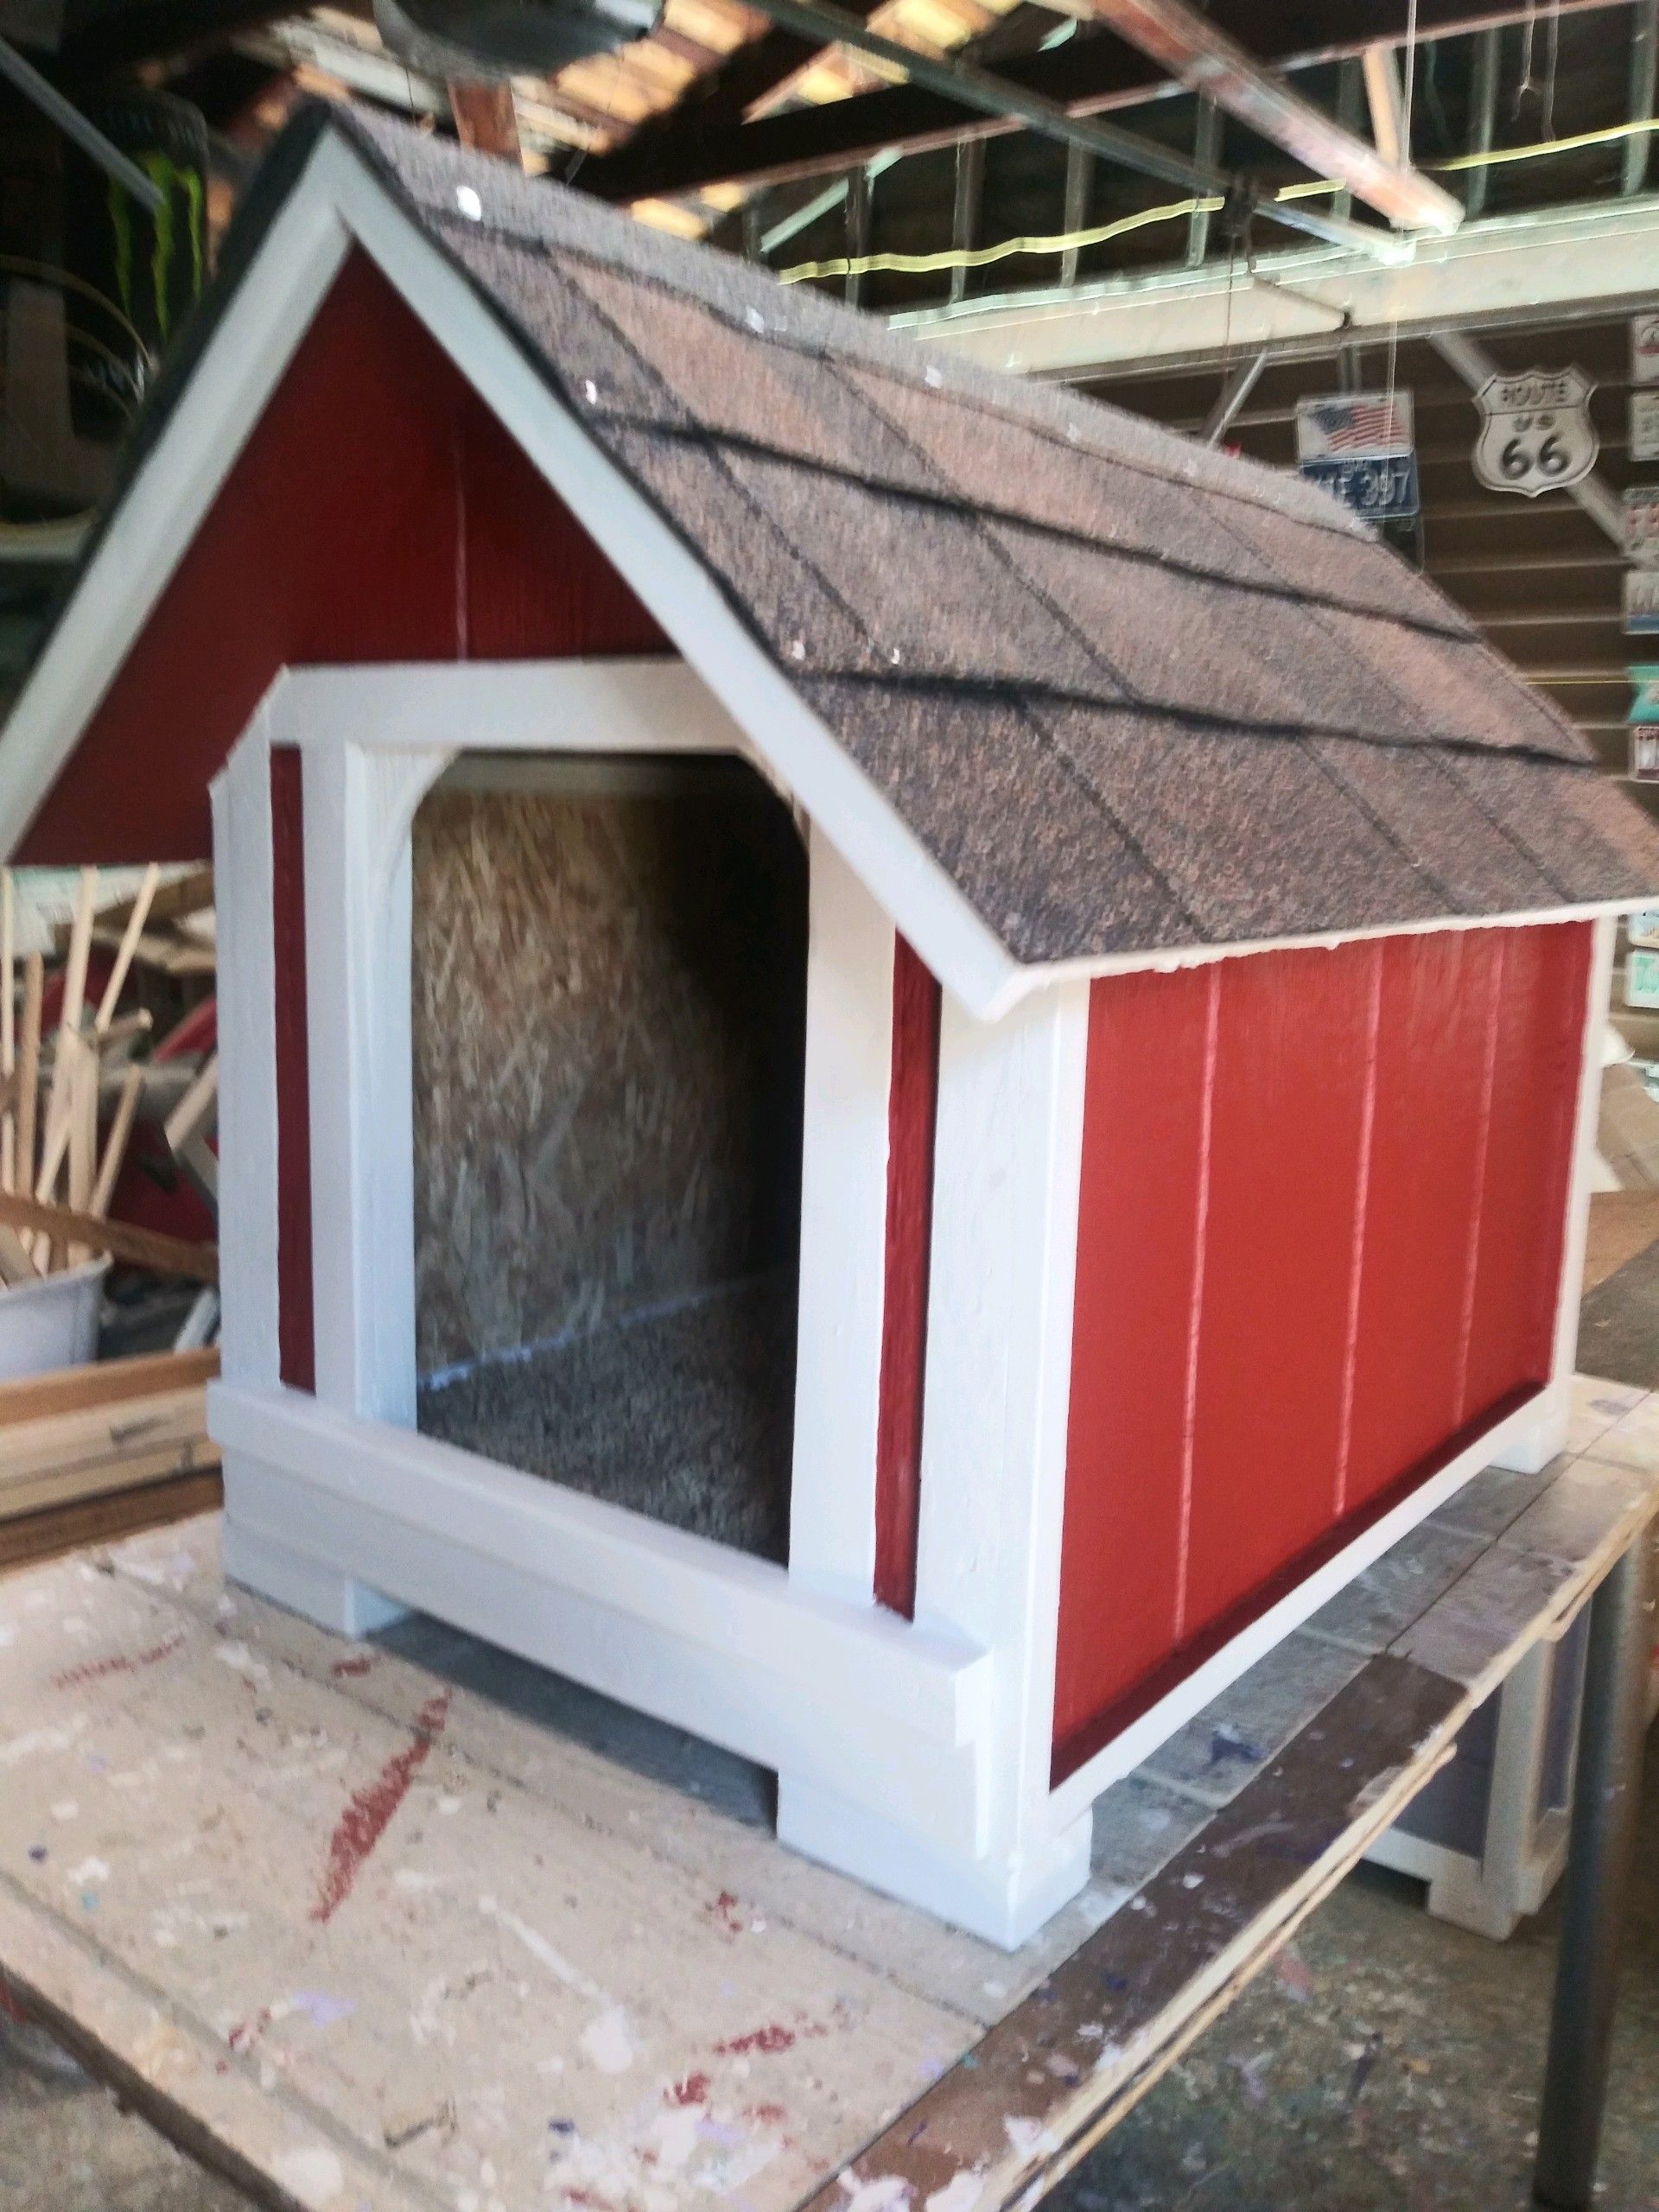 New dog house small- medium (must wear mask) $70 firm